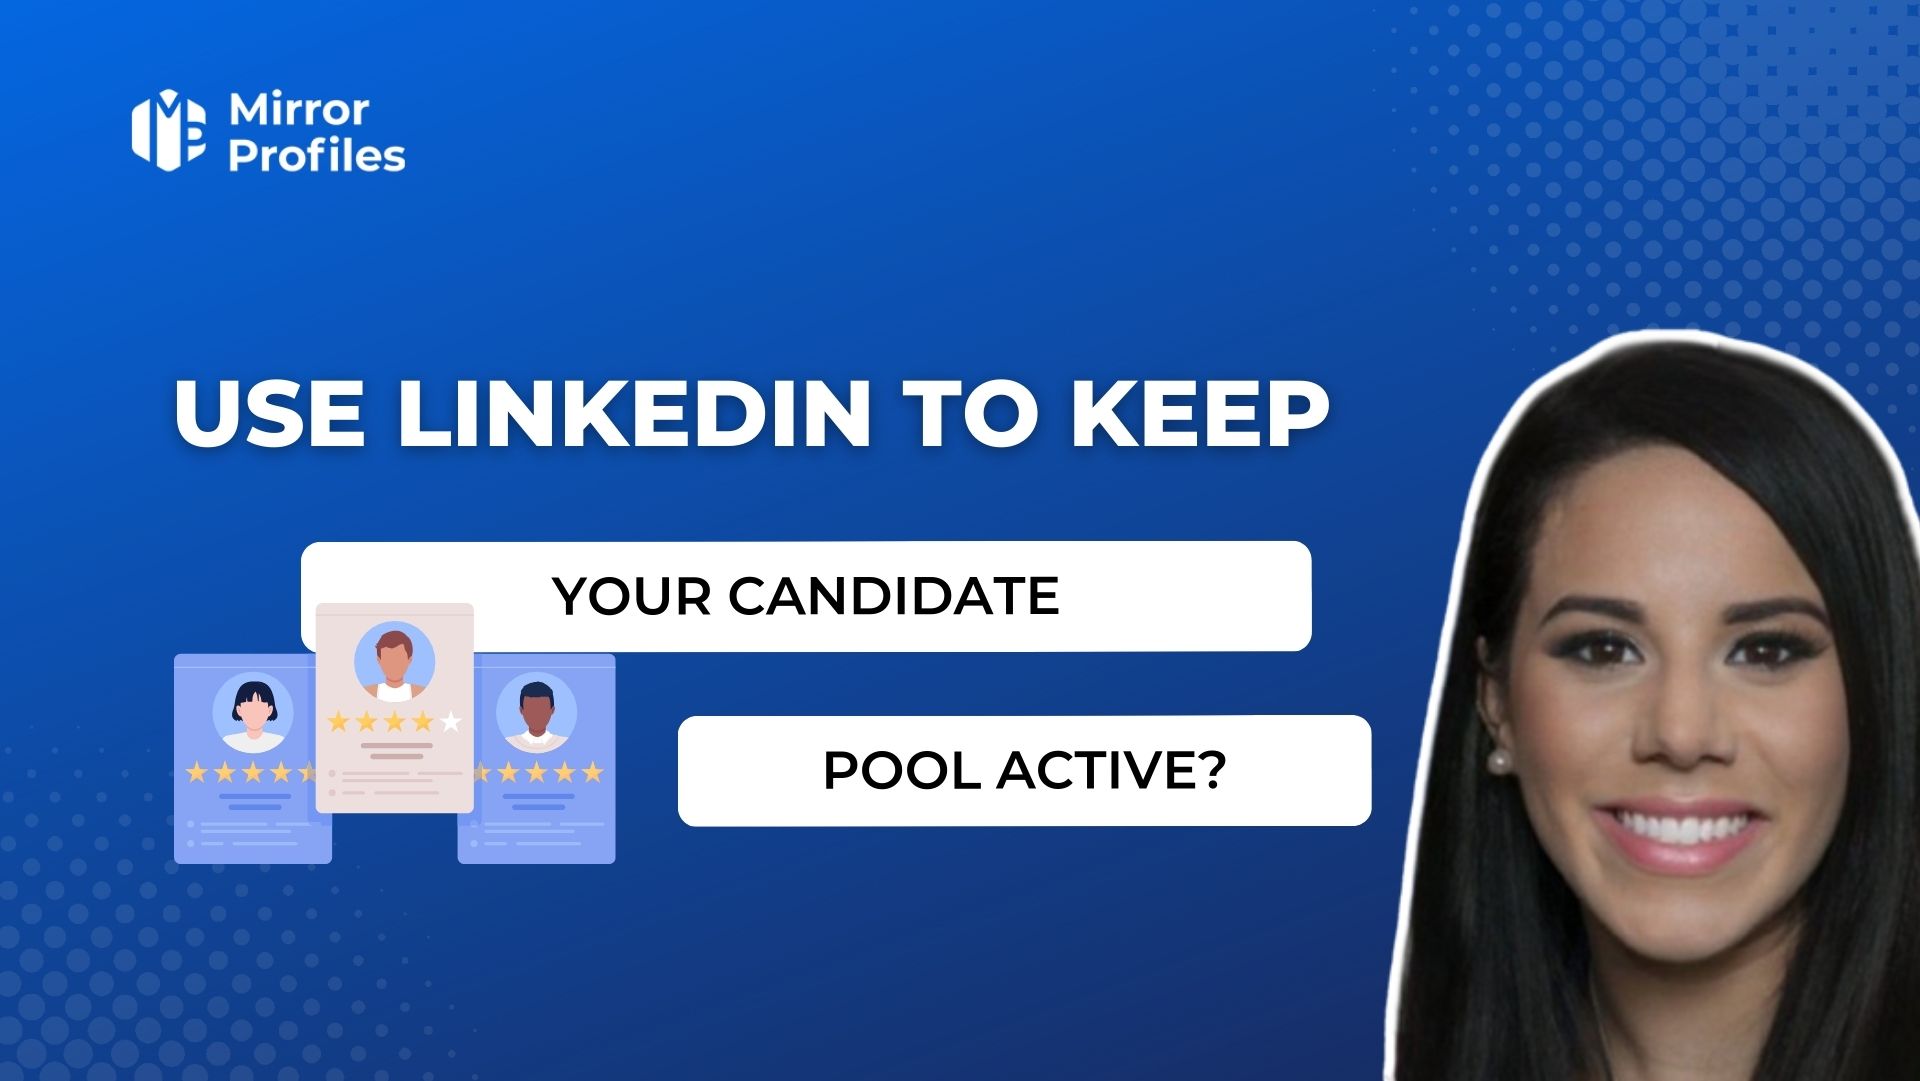 How can you use Linkedin to keep your candidate pool active?